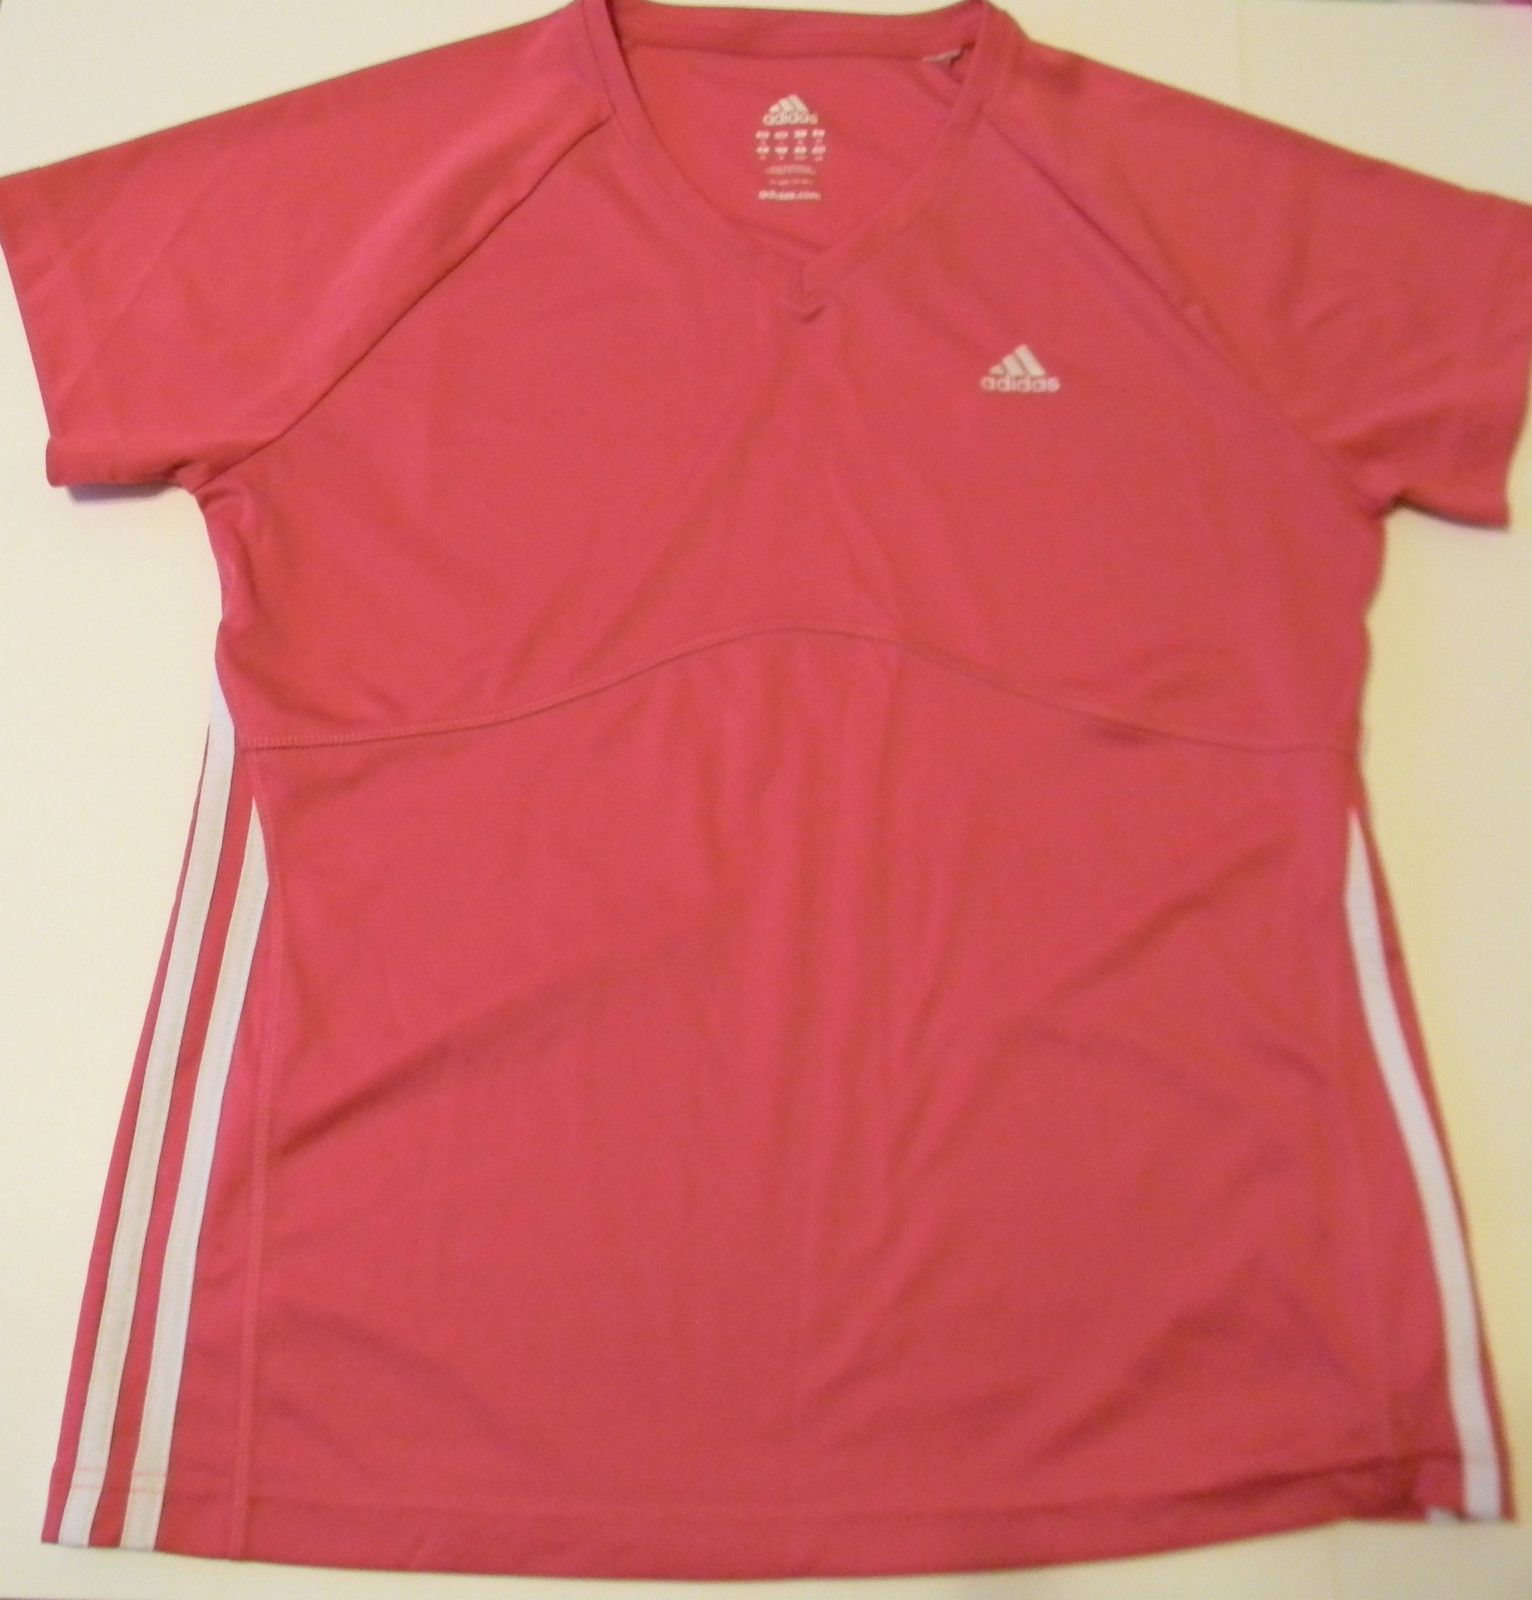 Adidas Active Top Red V Neck Short Sleeve Shirt Womens L